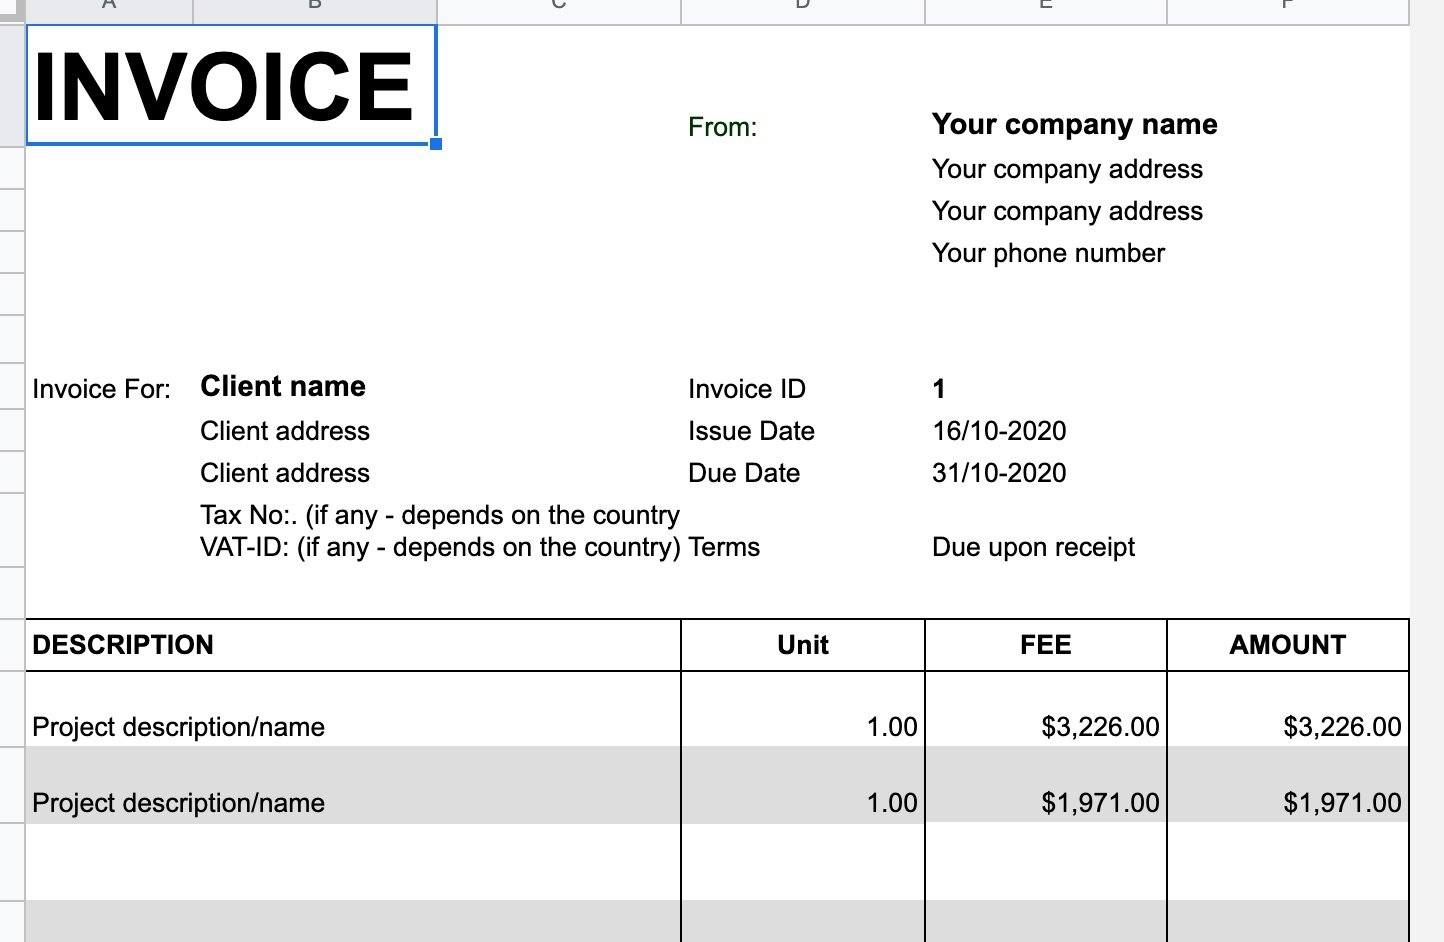 Invoice For Freelance Work In Minutes With This Template And Email Script